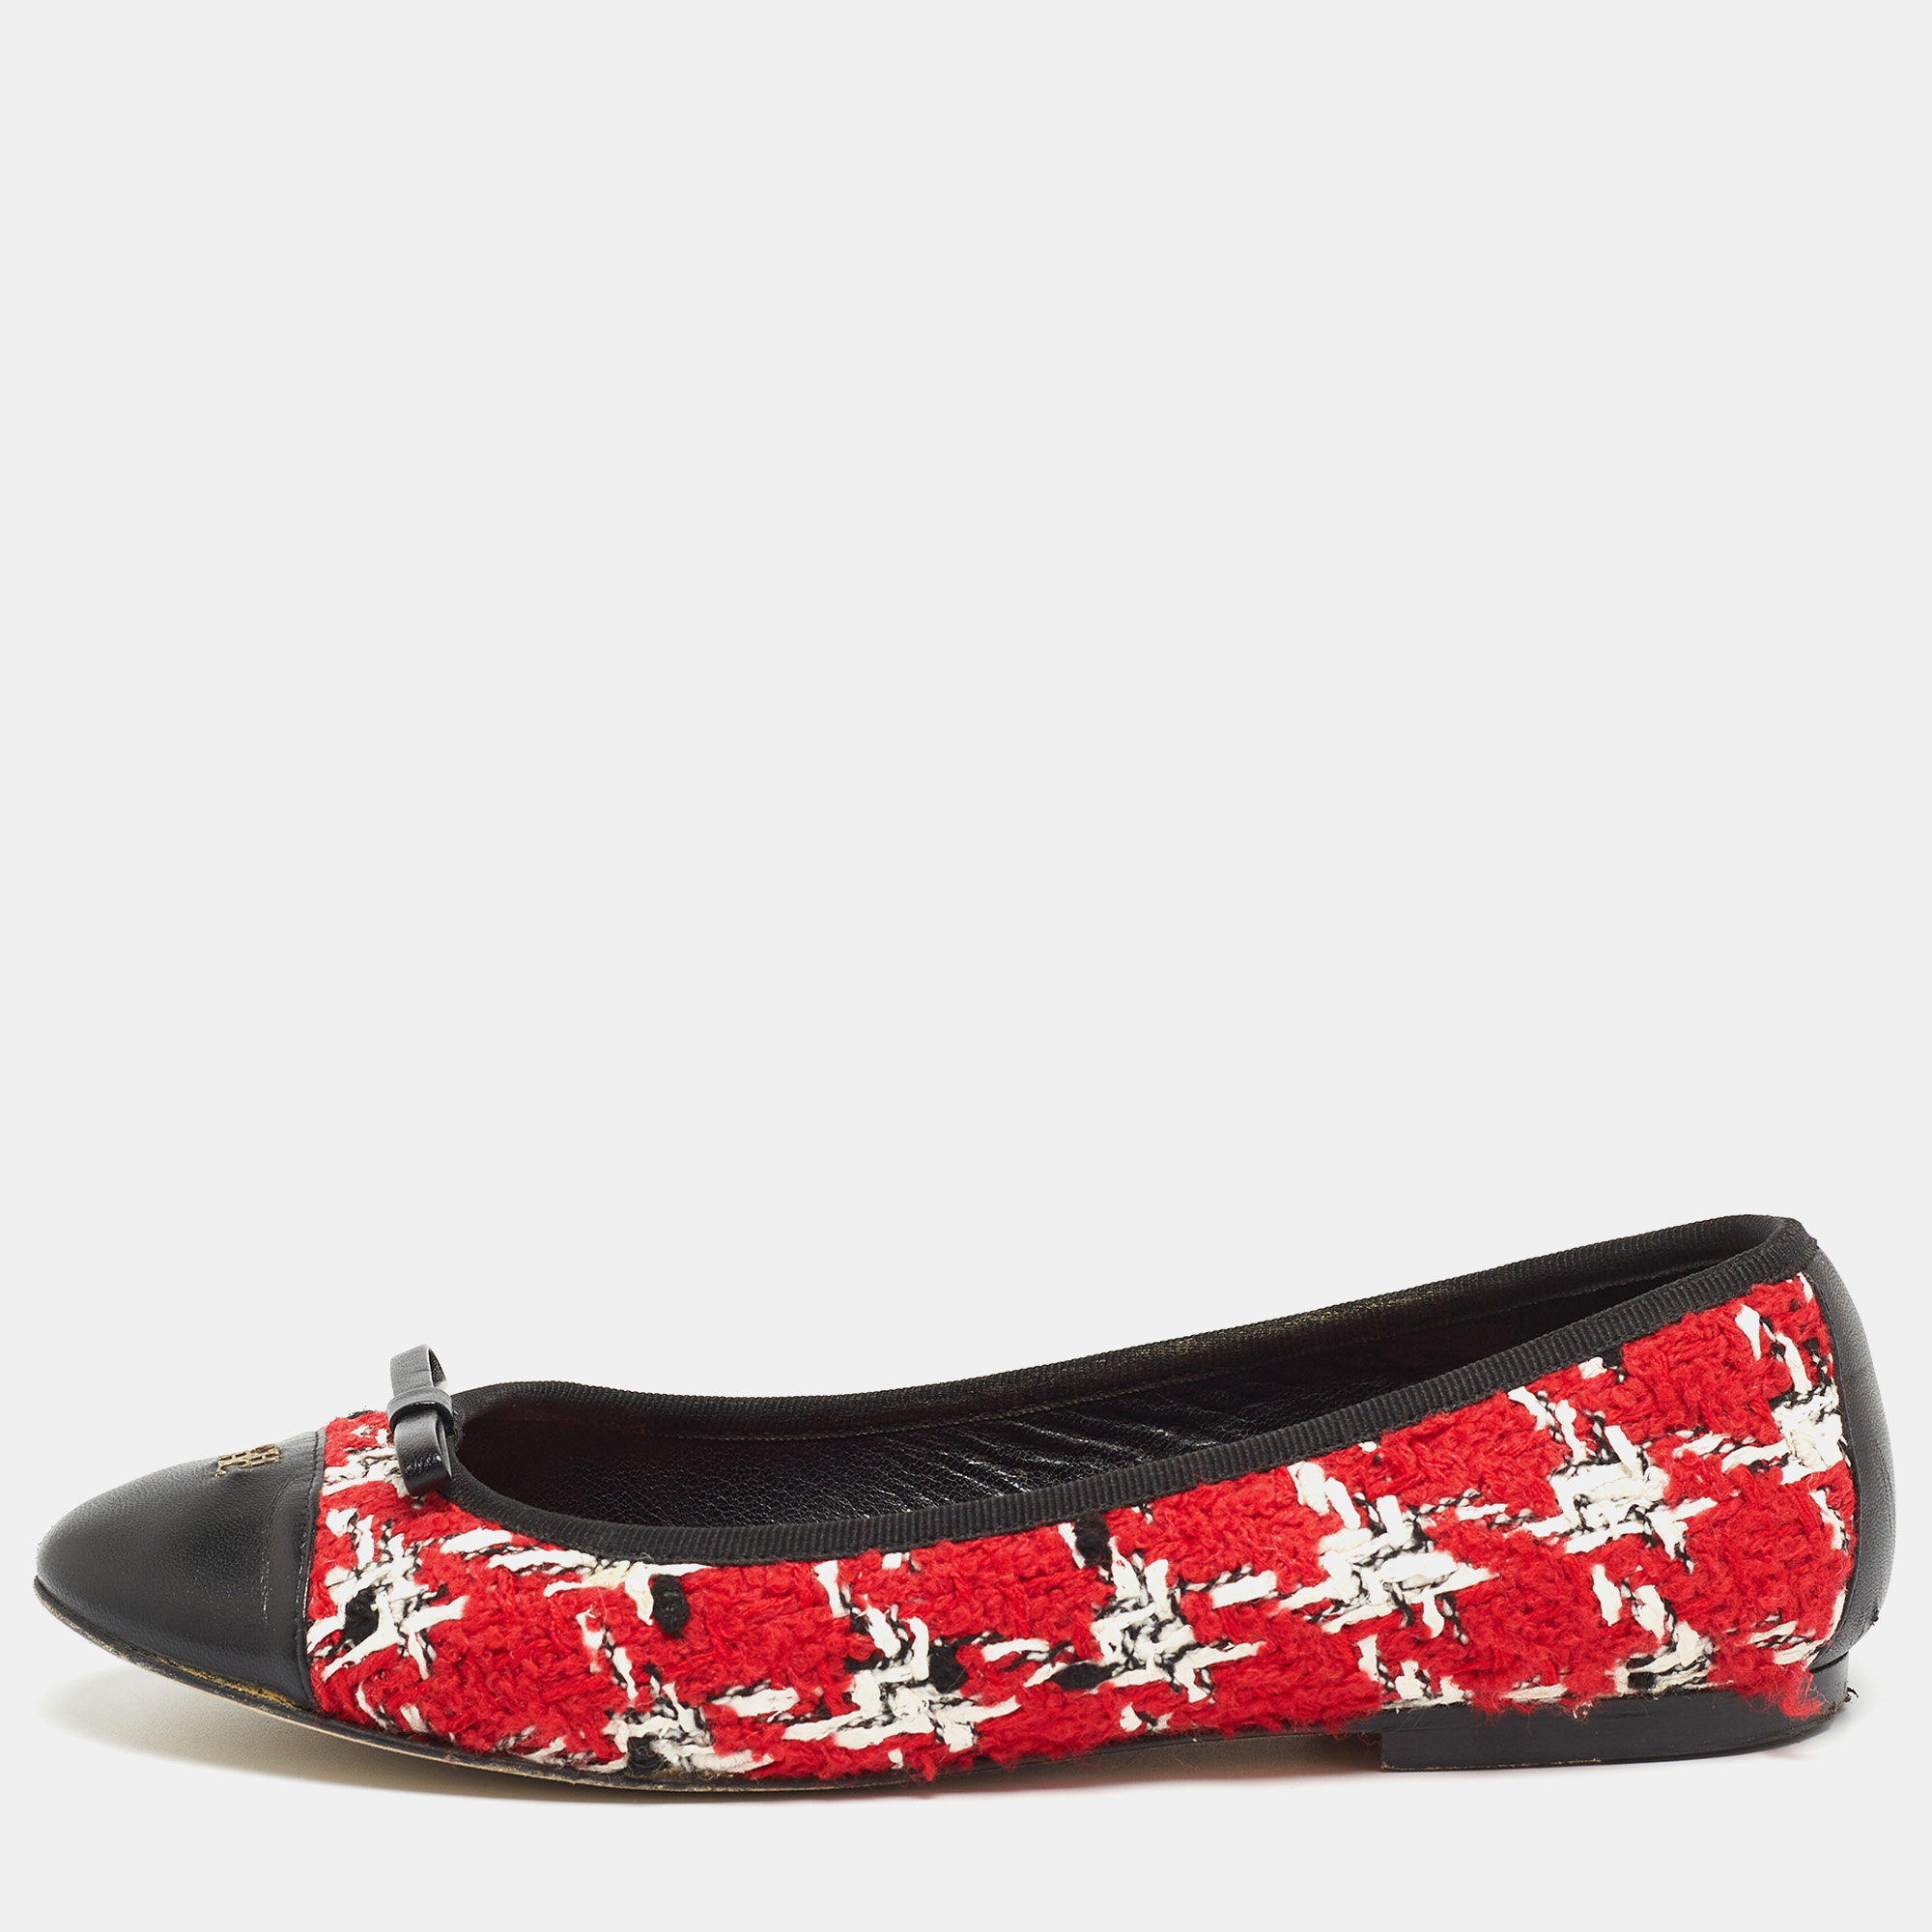 

CH Carolina Herrera Multicolor Tweed and Leather Bow Ballet Flats Size